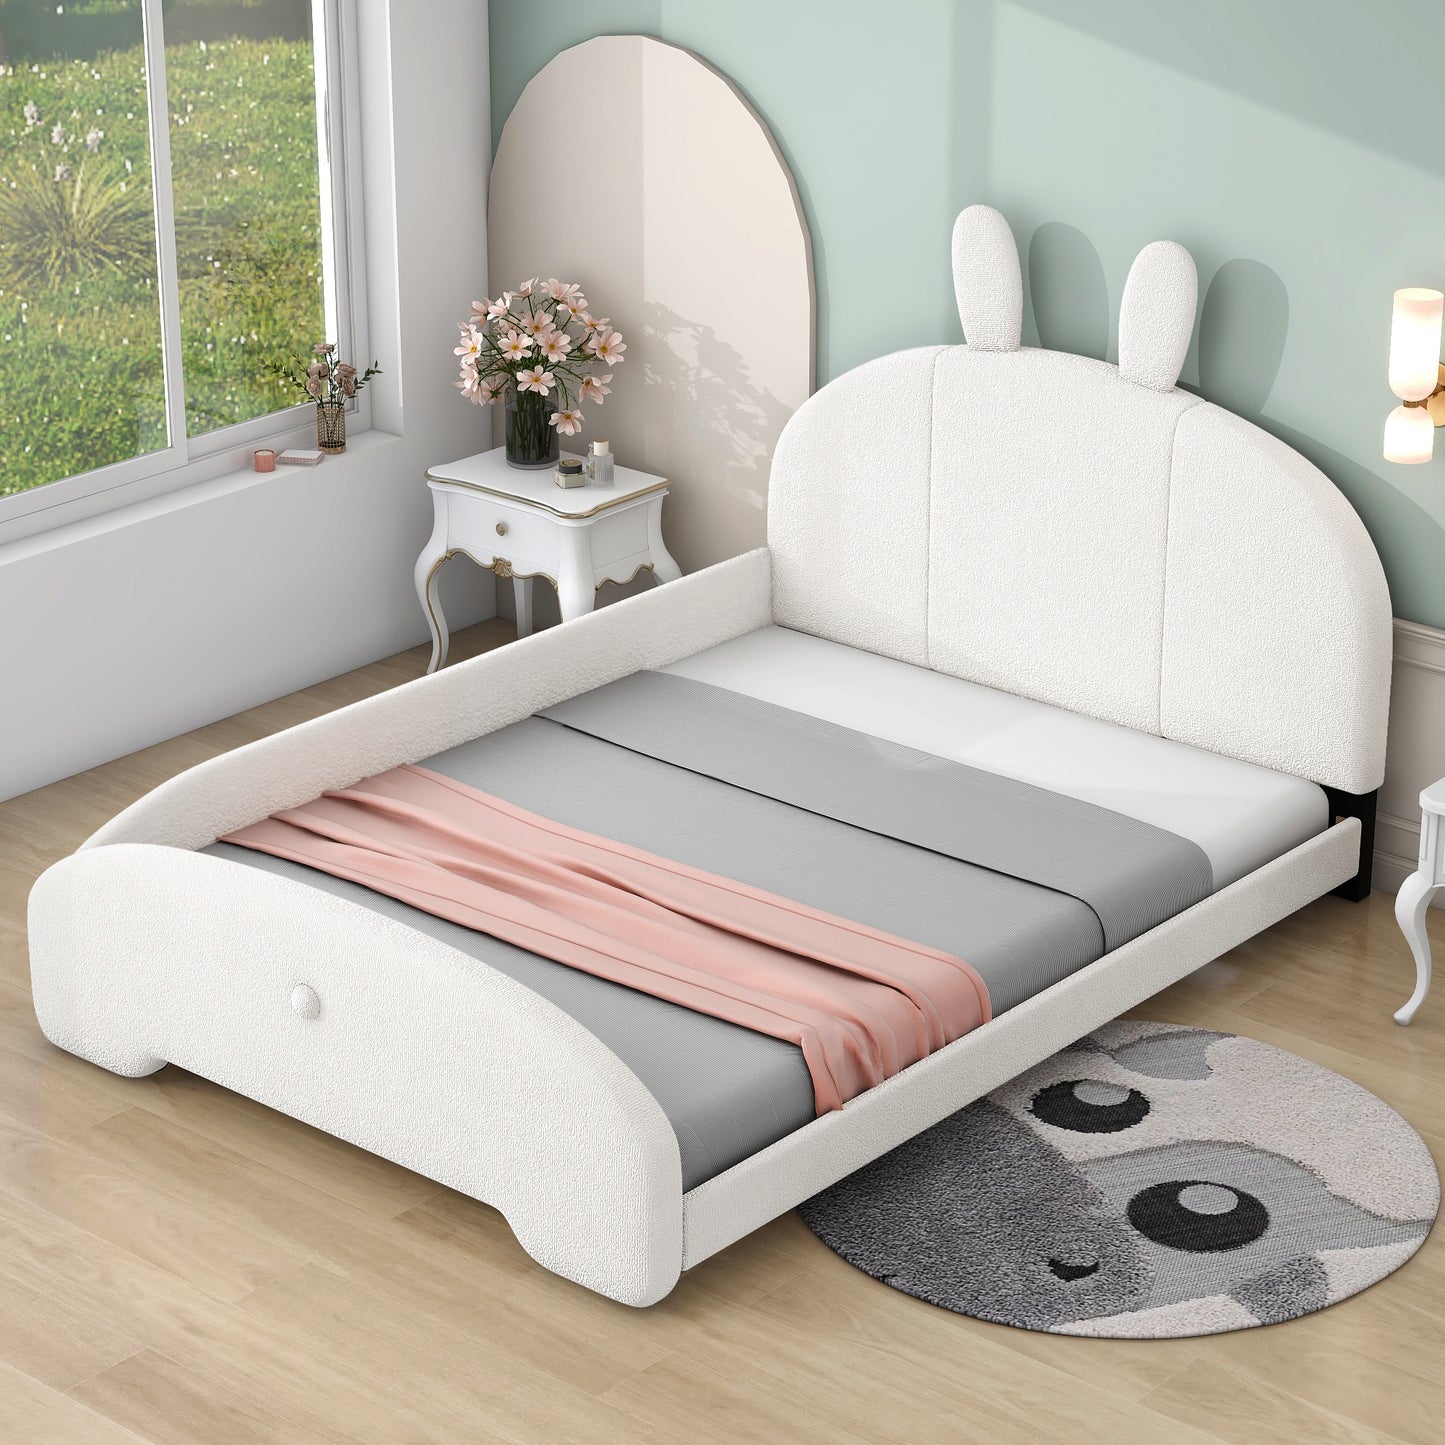 Full Size Upholstered Platform Bed with Cartoon Ears Shaped Headboard, White